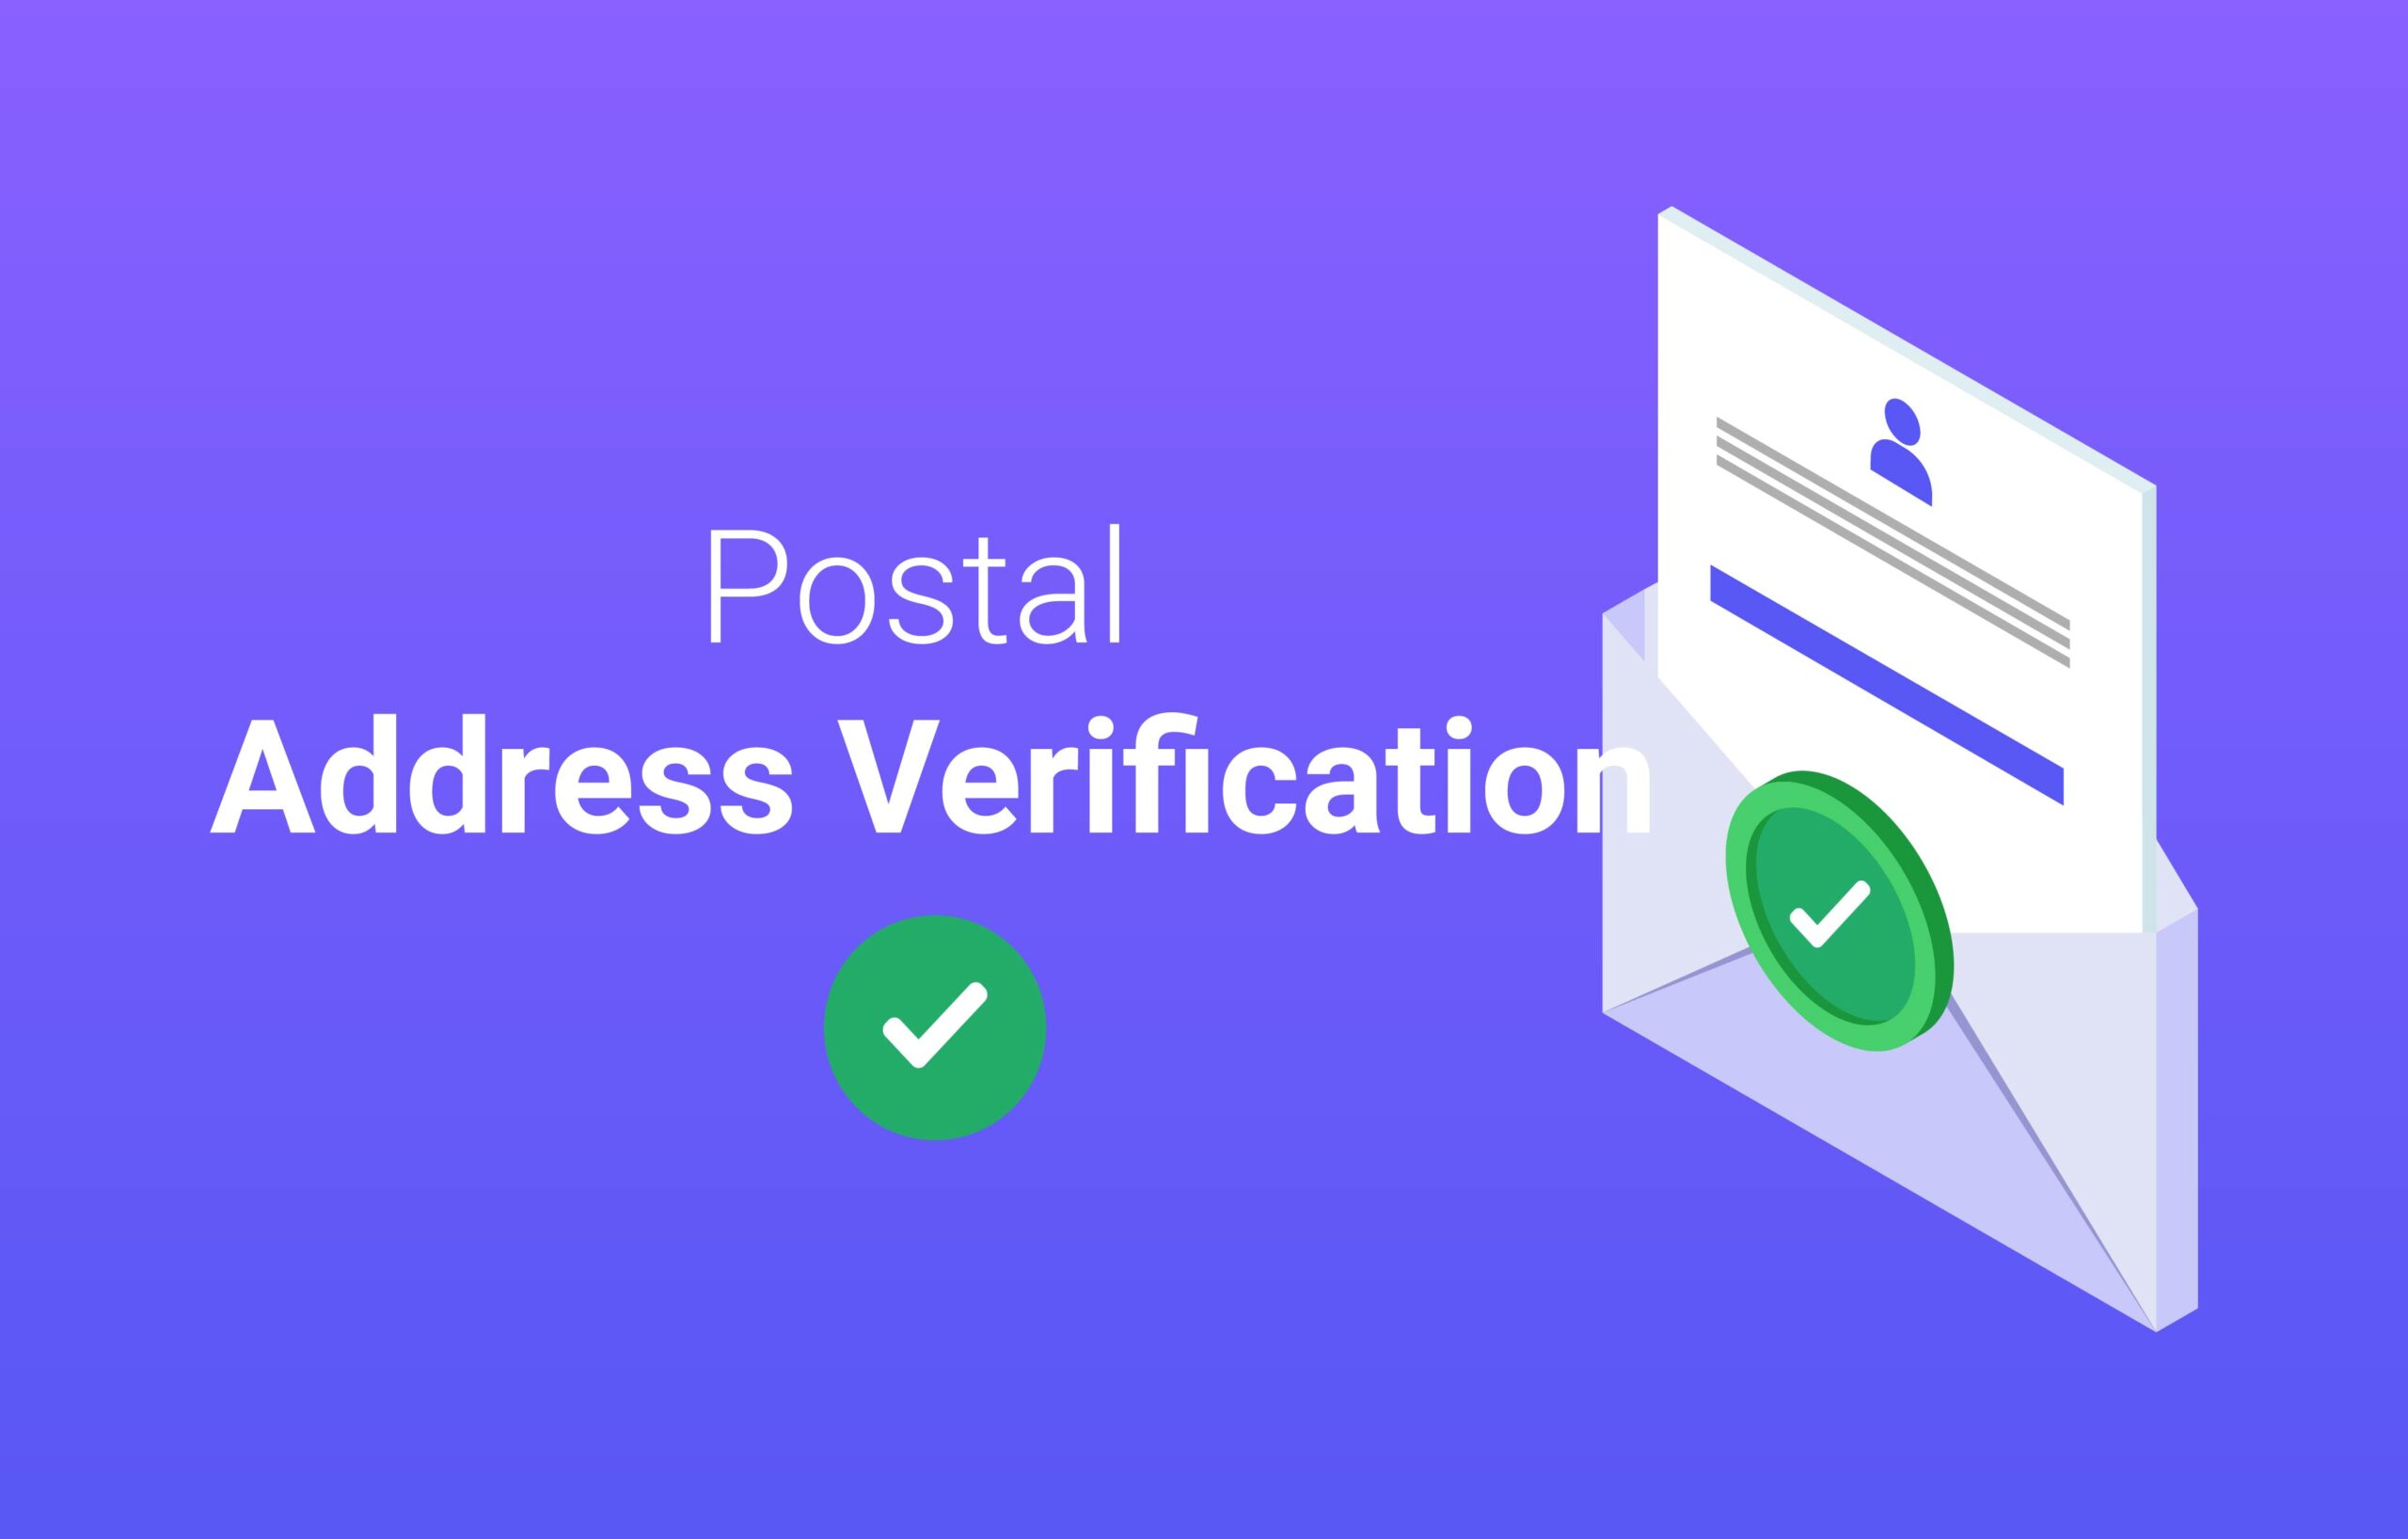 Tools and Best Practices for Verifying Postal Addresses